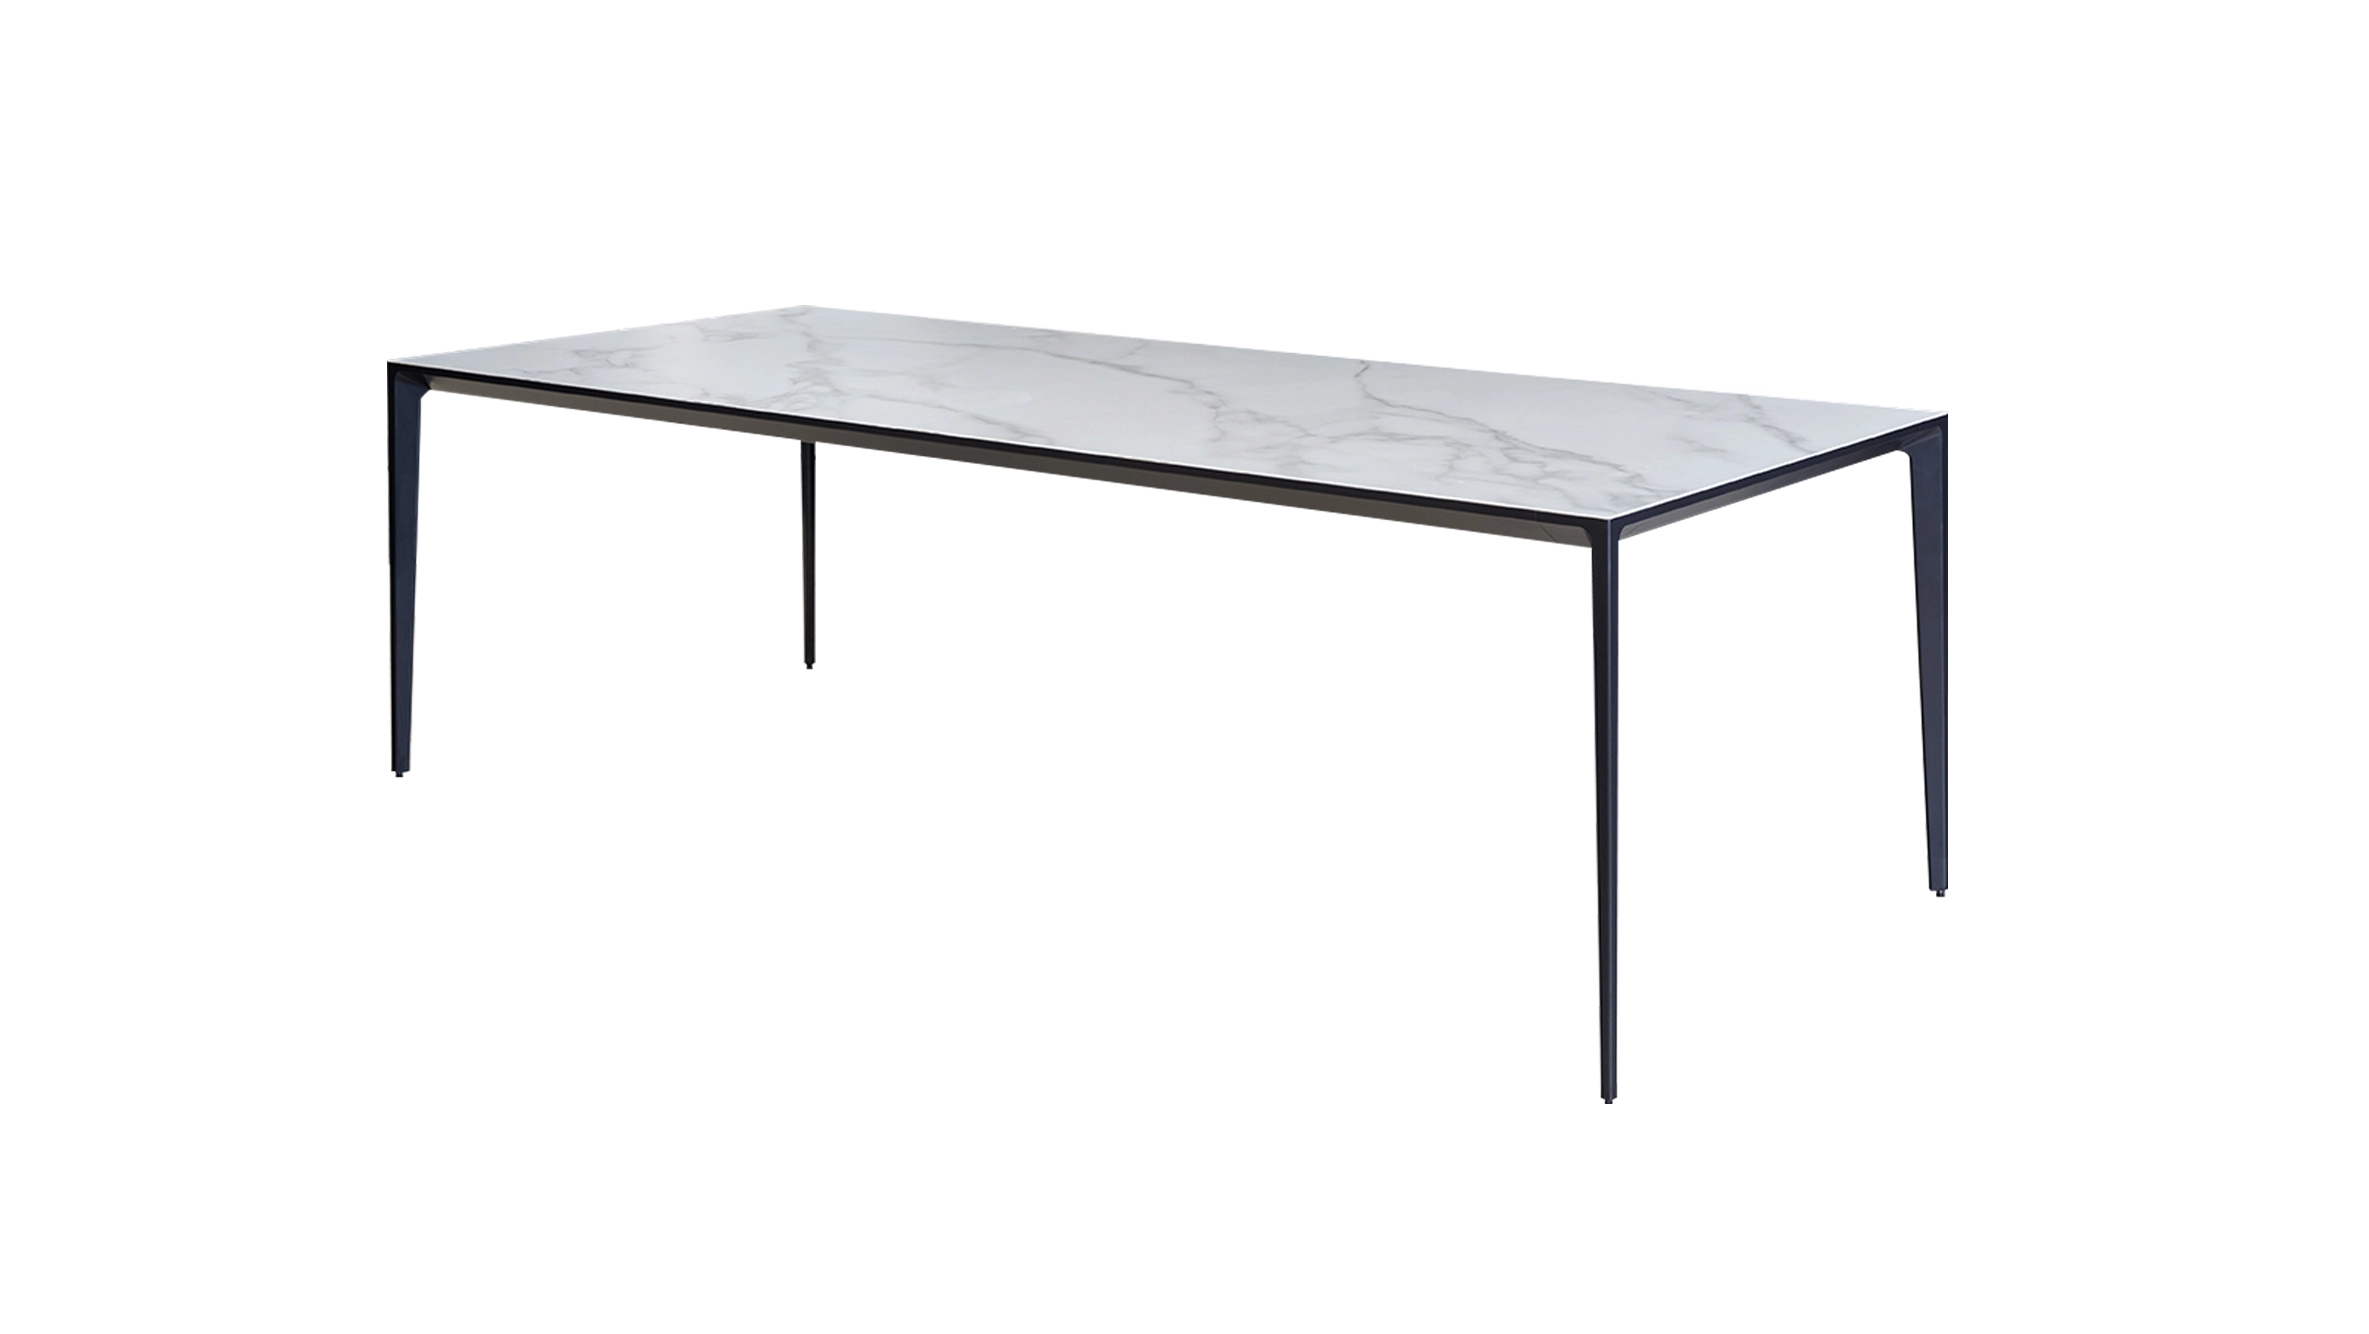 Long Island Minimalist dining table with ceramic table top and aluminum table base BK CIANDRE 2